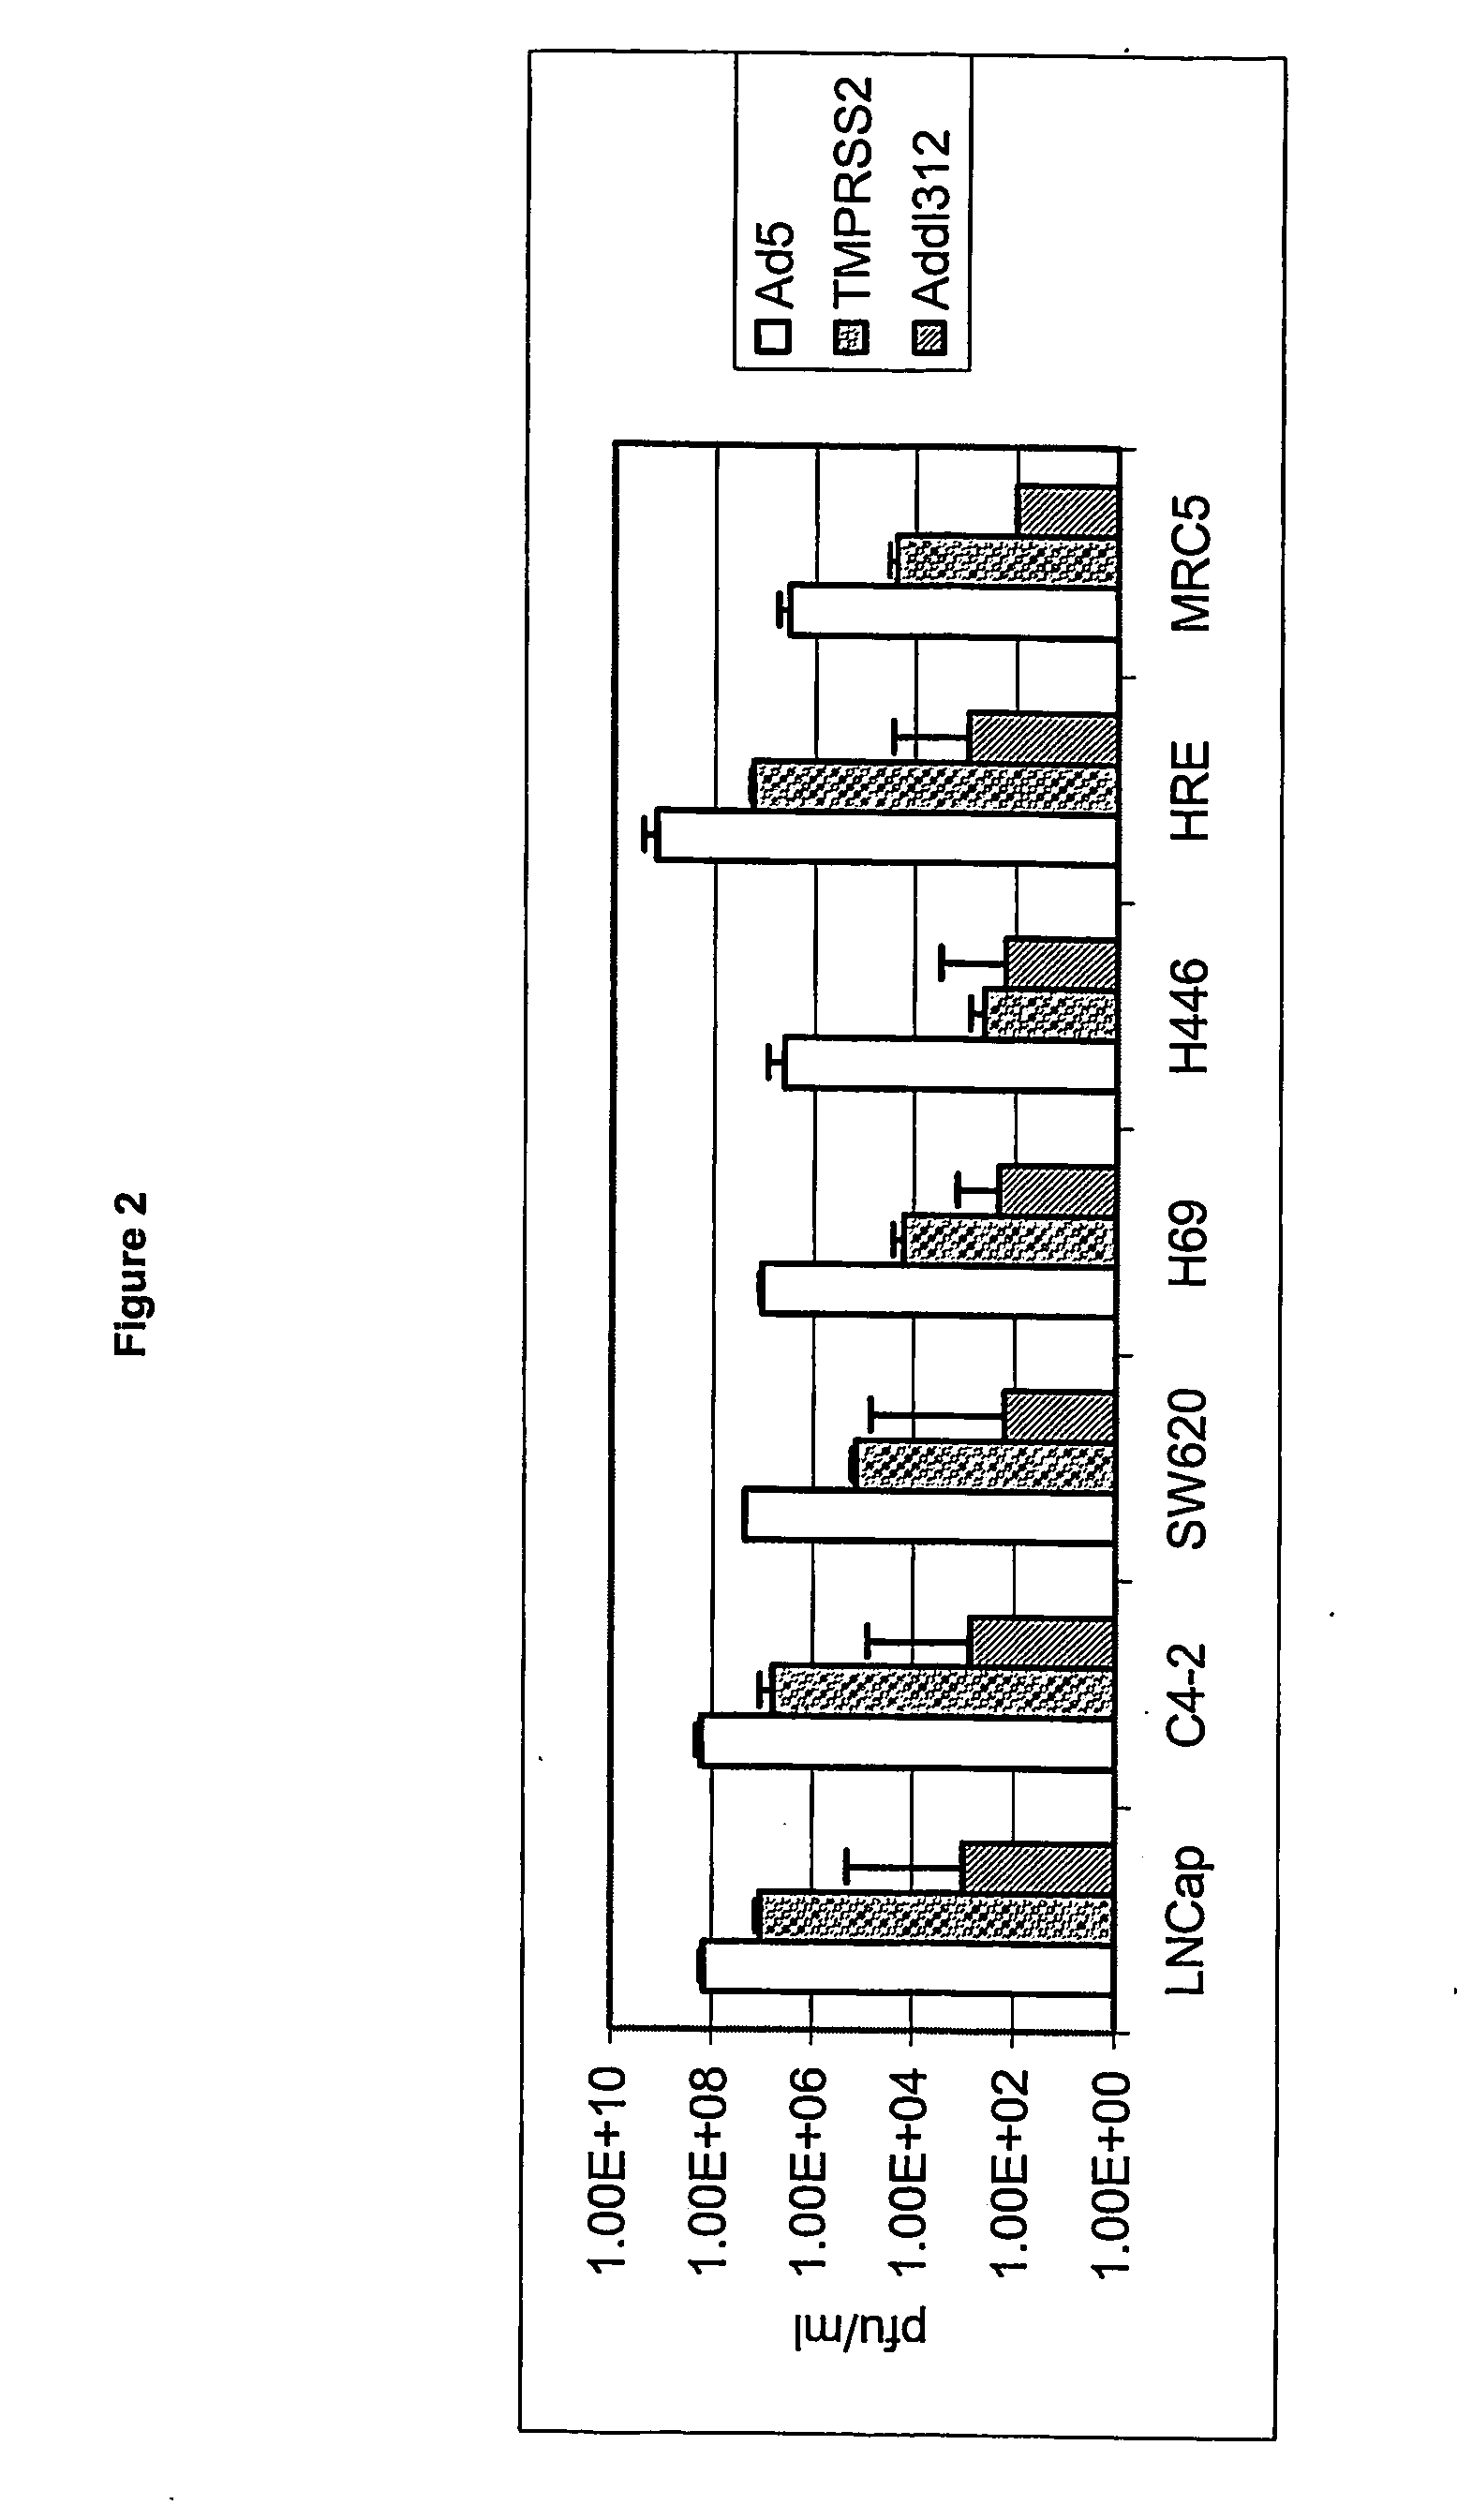 Tmprss2 Regulatory Sequences and Uses Thereof